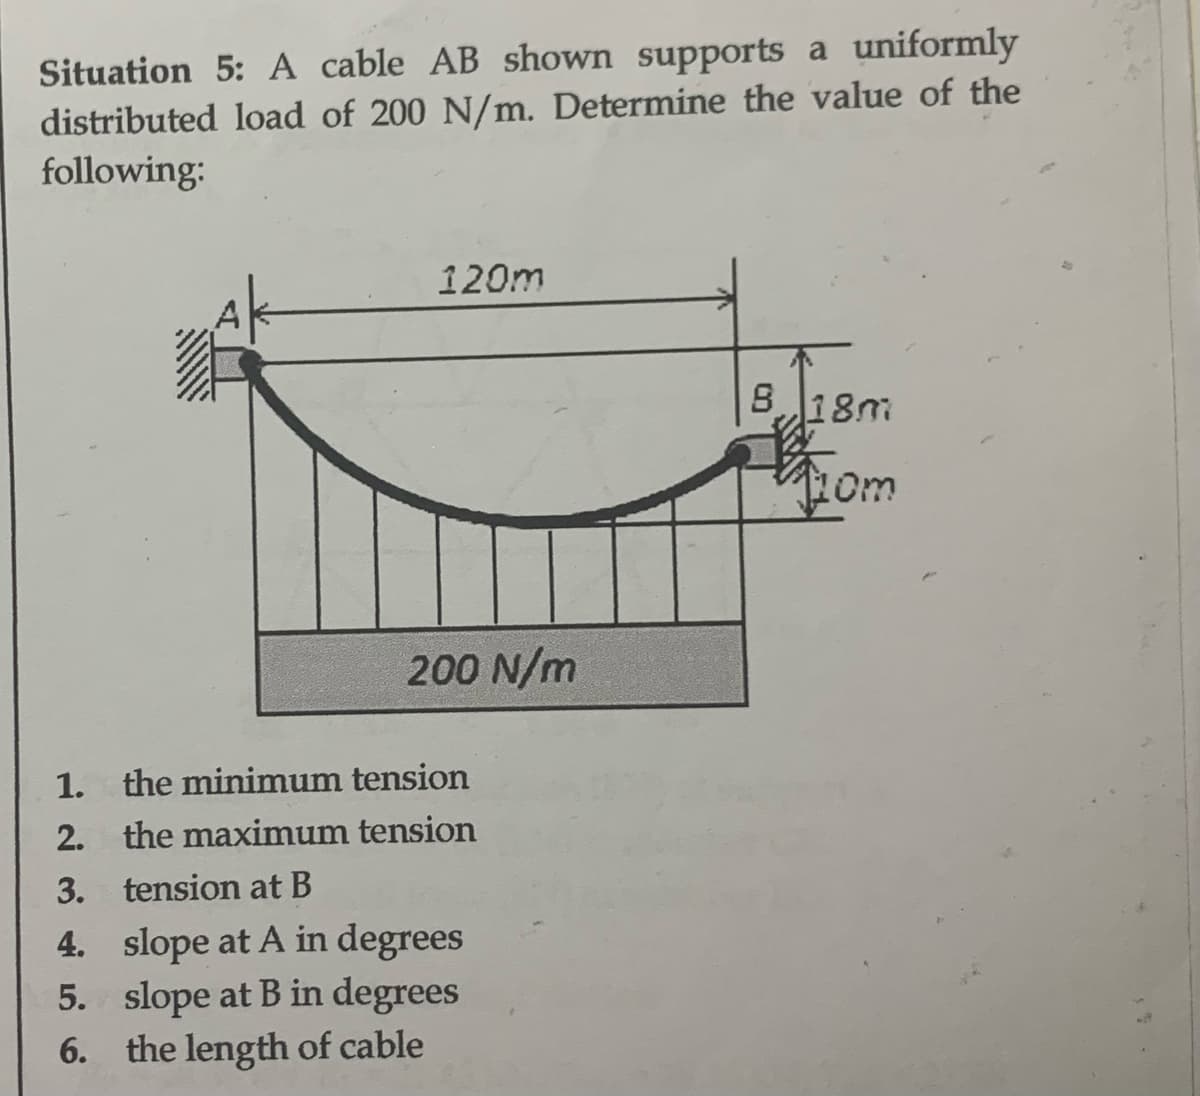 Situation 5: A cable AB shown supports a uniformly
distributed load of 200 N/m. Determine the value of the
following:
120m
200 N/m
1.
the minimum tension
2. the maximum tension
tension at B
3.
4. slope at A in degrees
slope at B in degrees
5.
6. the length of cable
B 18m
8
110m